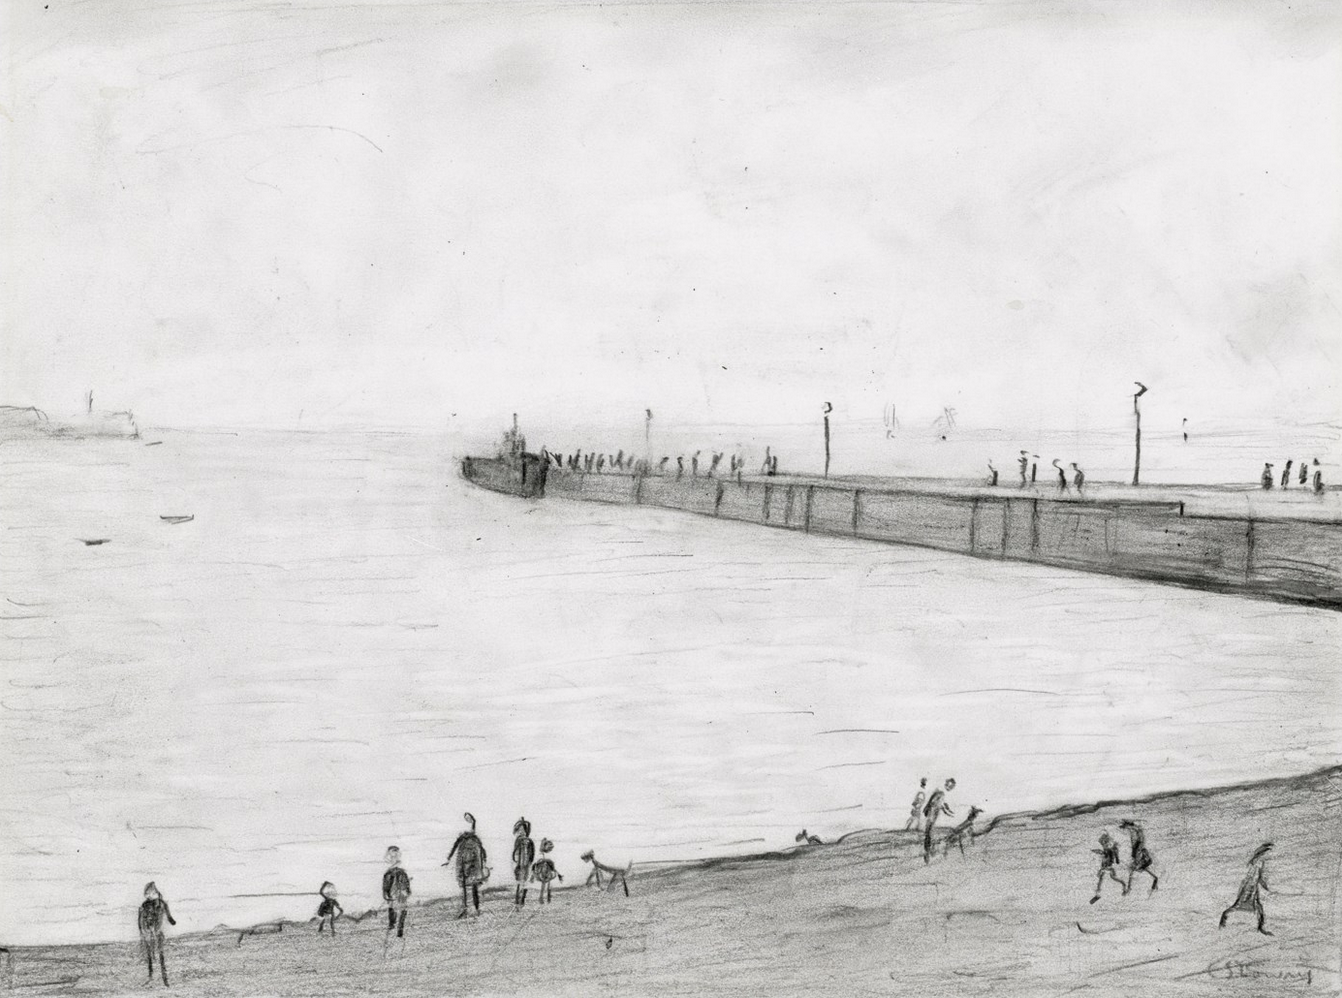 The Ferry Slip at Knott End on Sea (circa 1953) by Laurence Stephen Lowry (1887 - 1976), English artist.